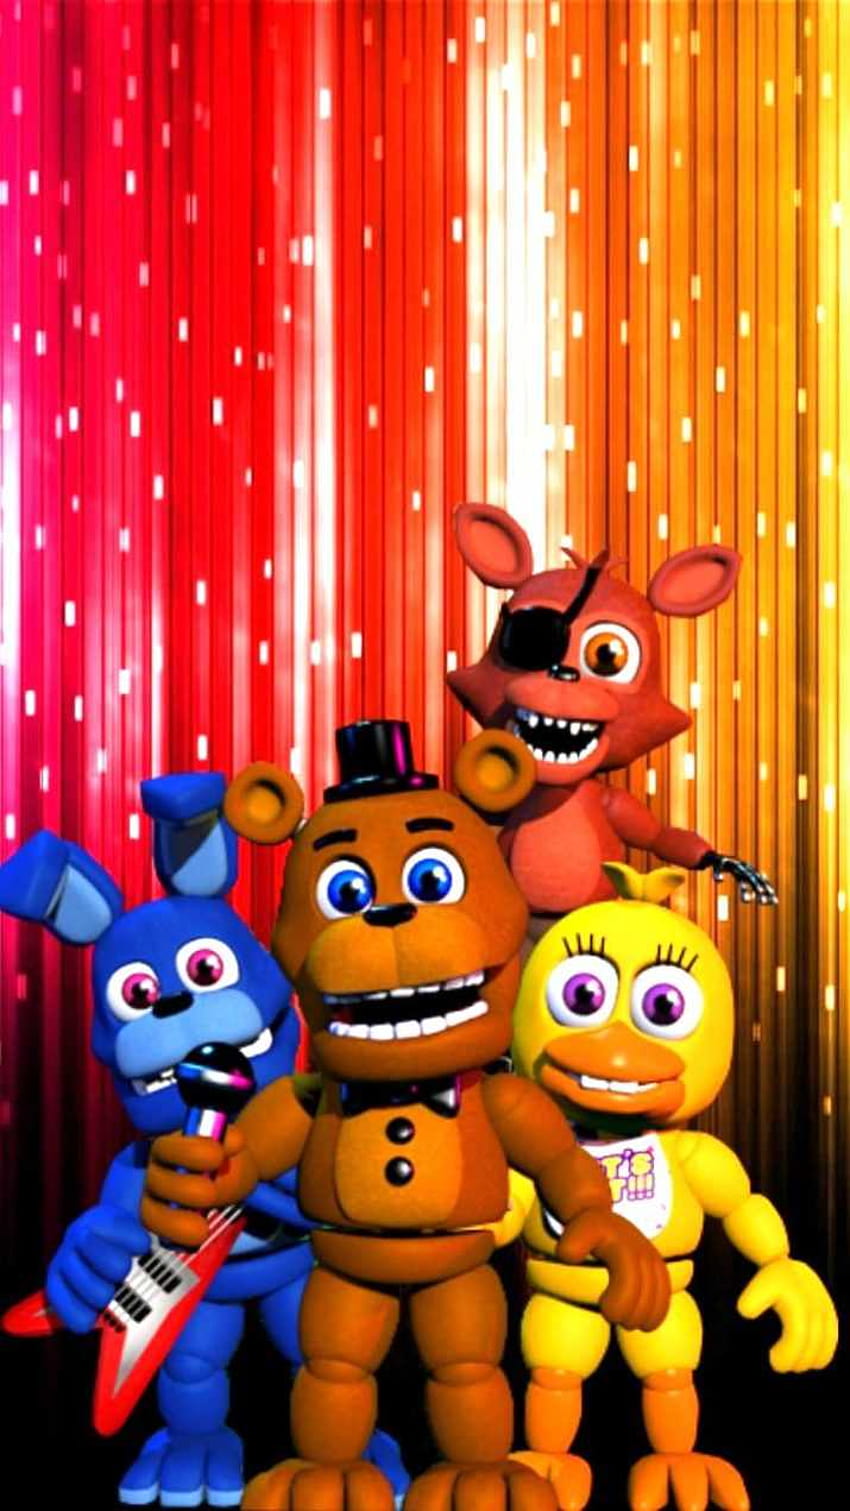 Wallpaper ID 399501  Video Game Five Nights At Freddys 2 Phone Wallpaper   1080x1920 free download